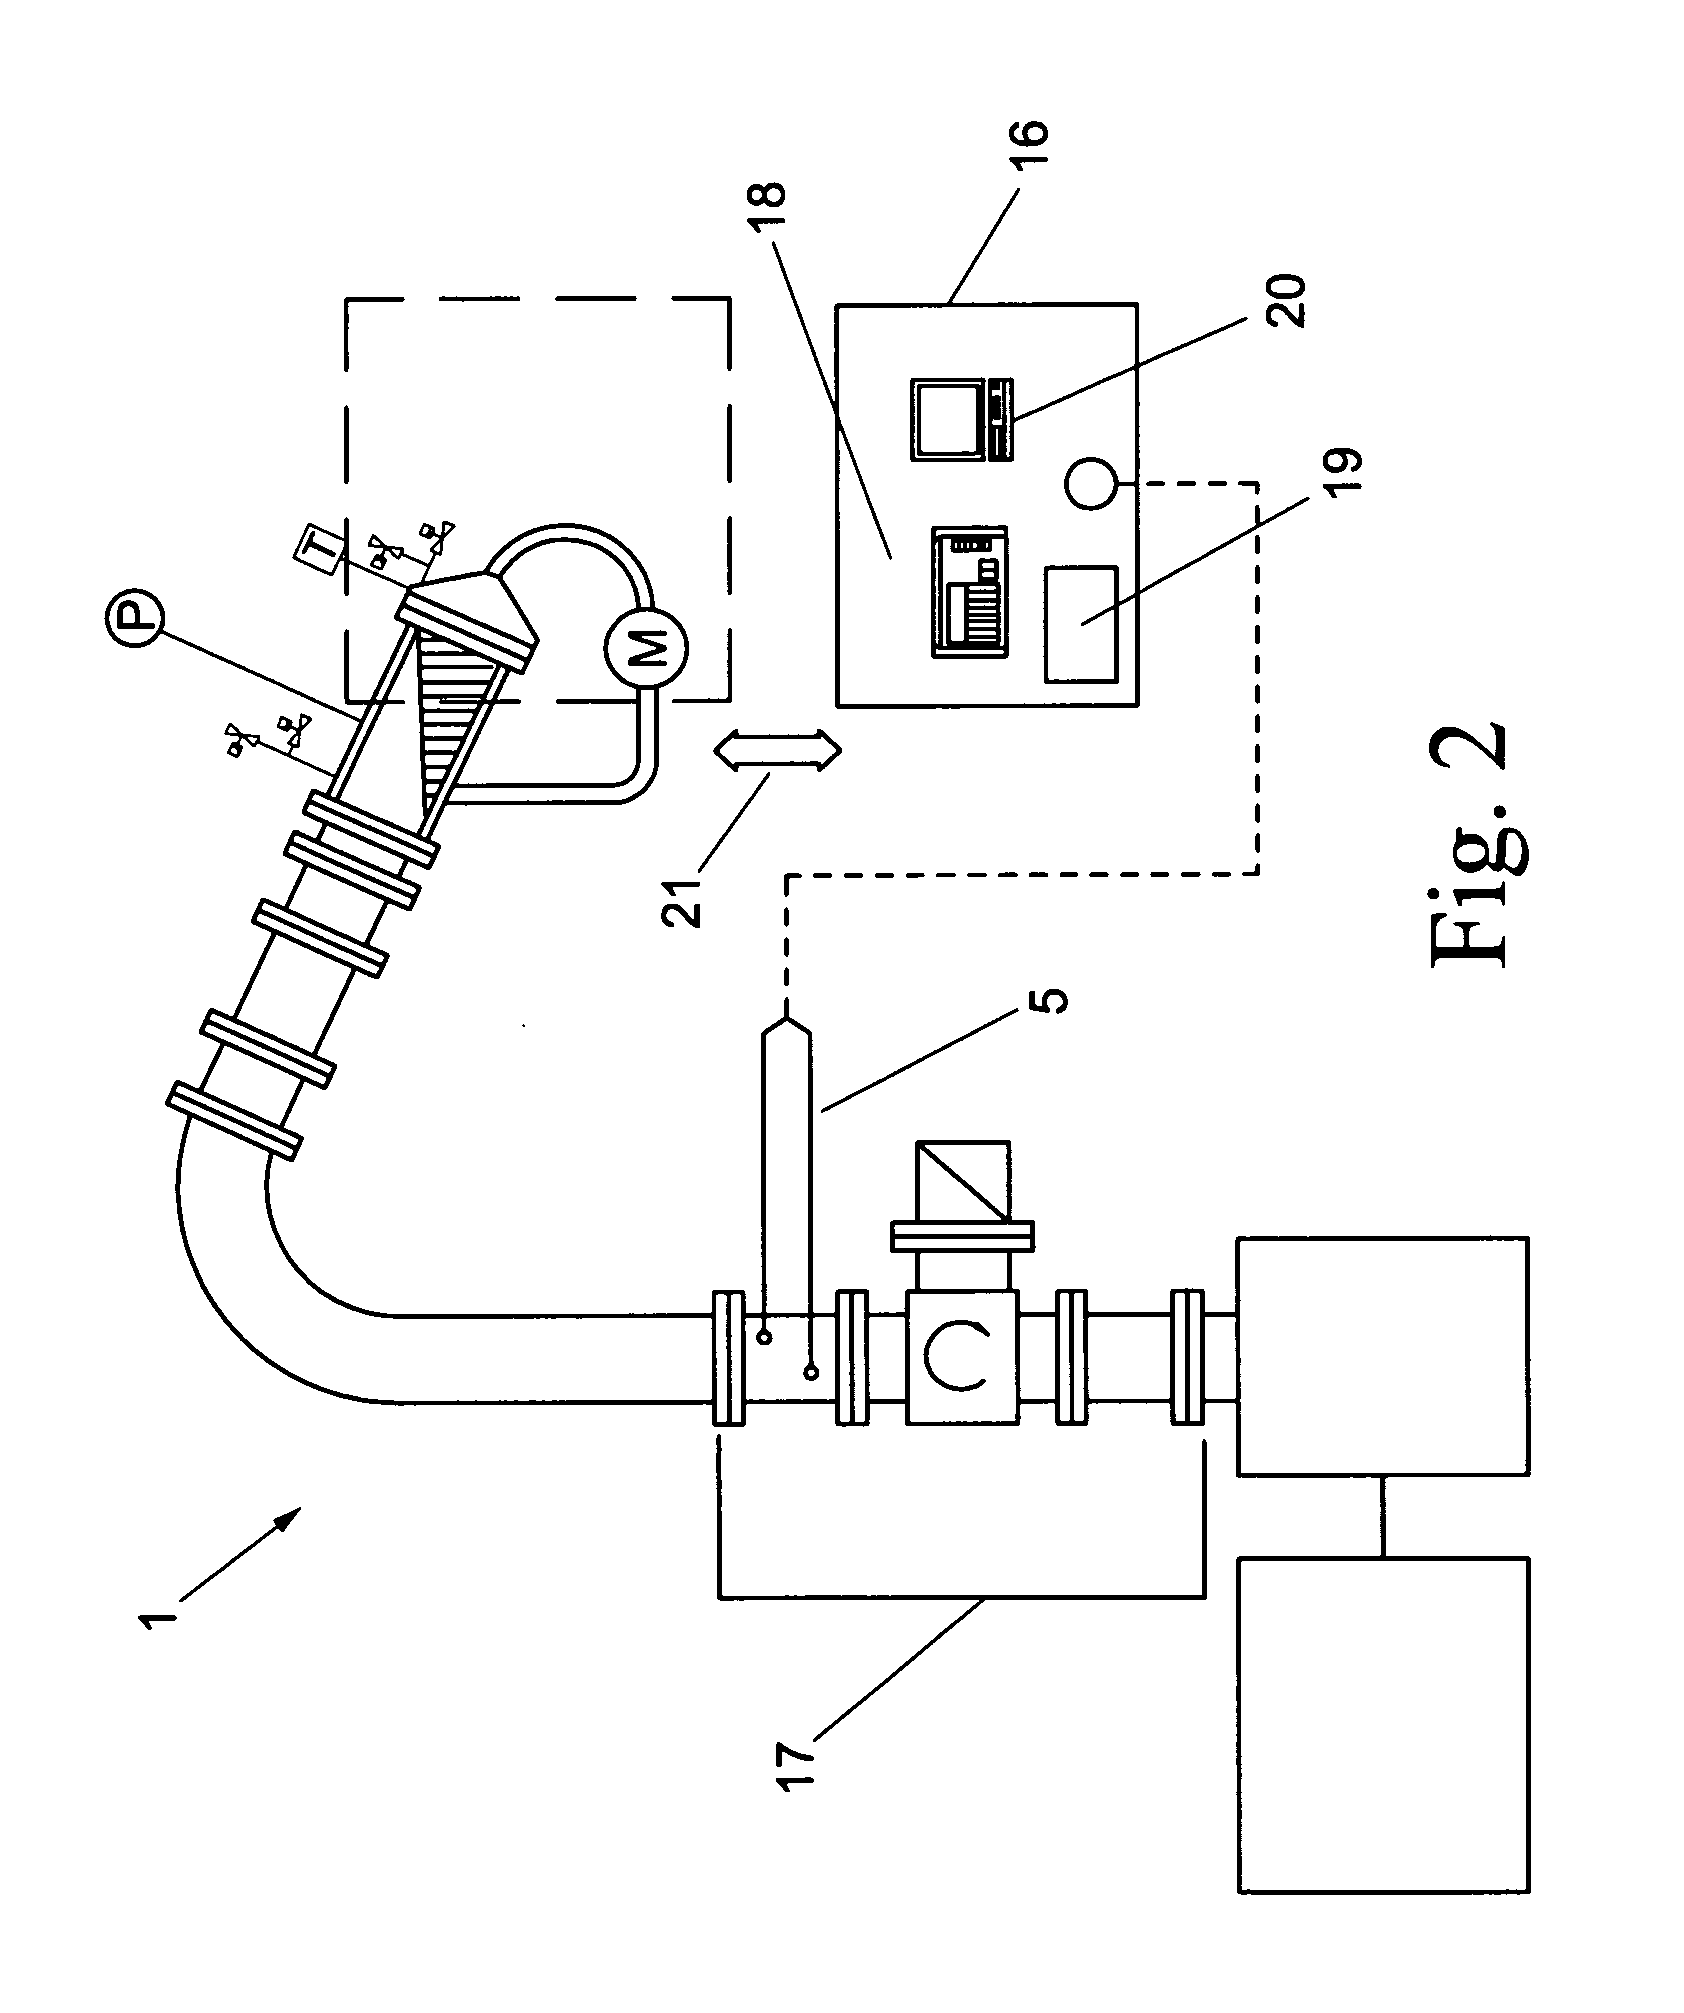 Method and apparatus for microwave assisted processing of feedstocks